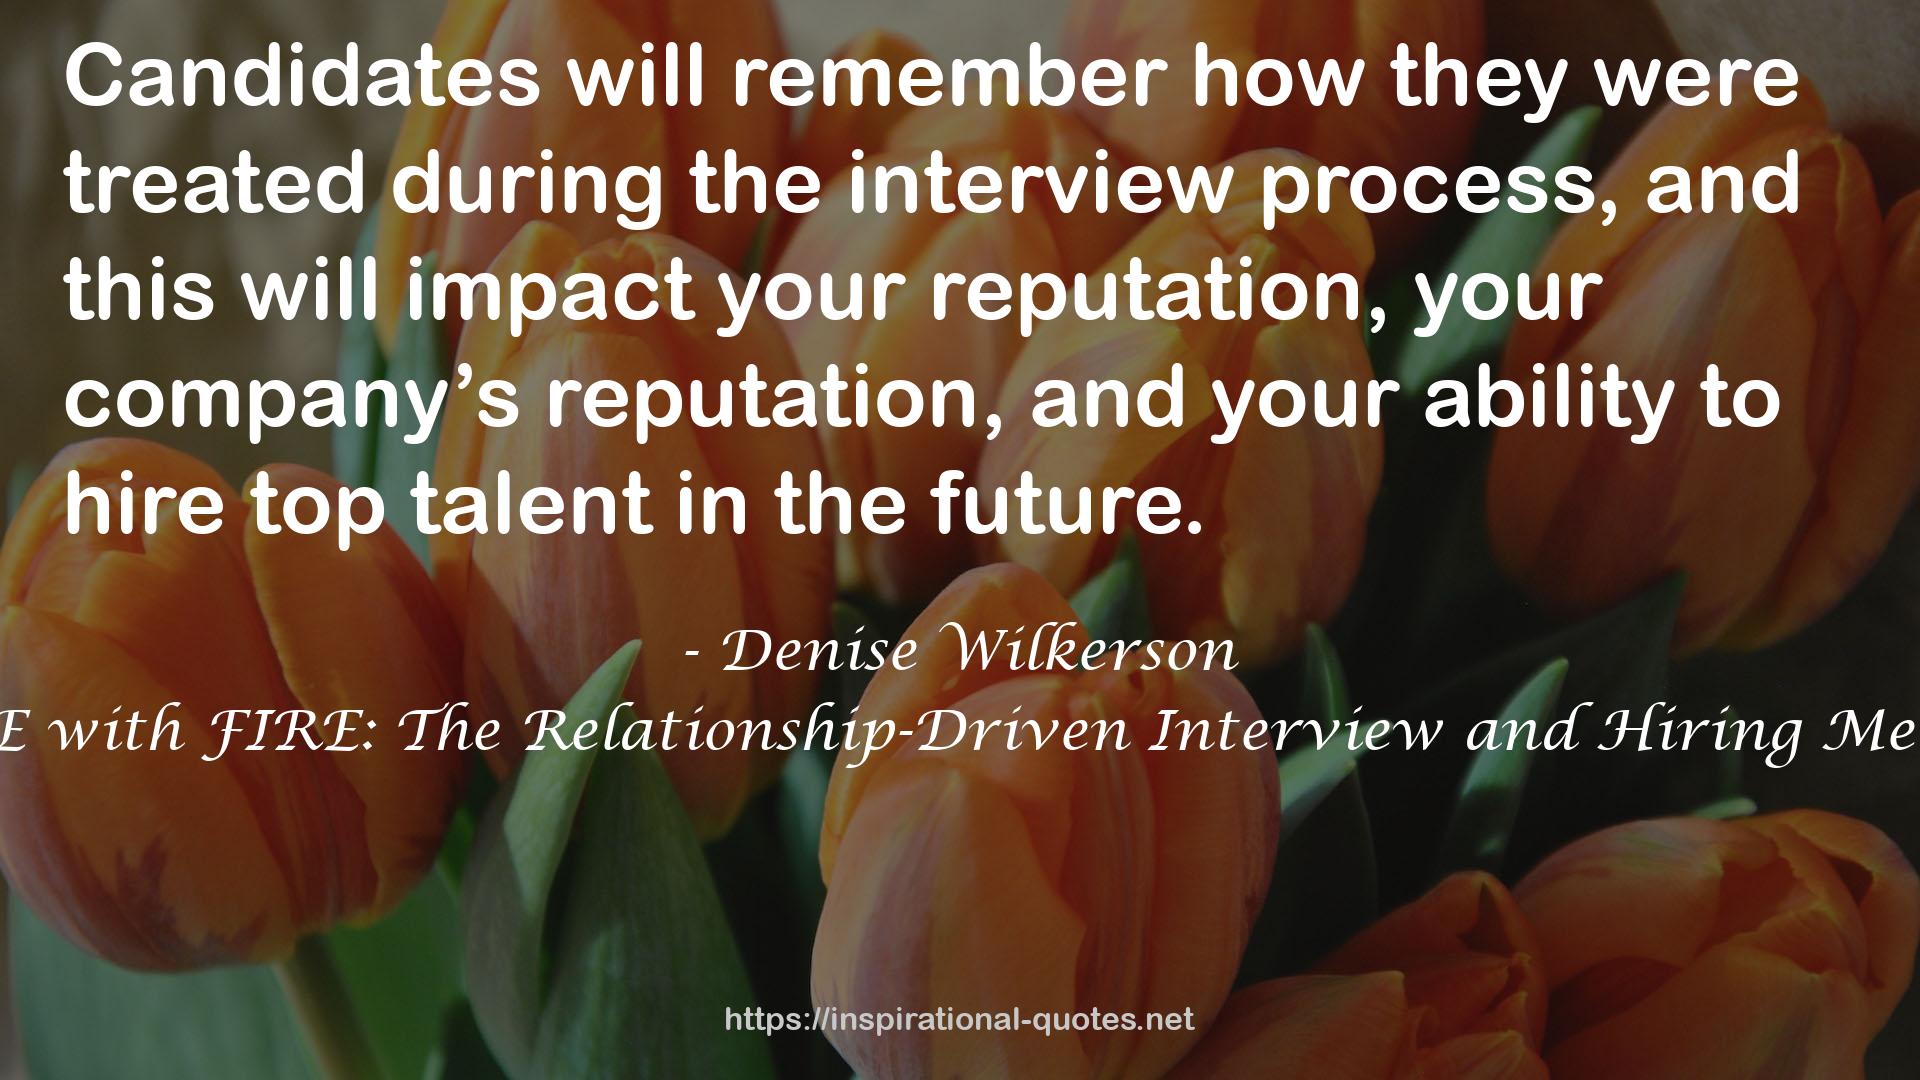 Denise Wilkerson QUOTES